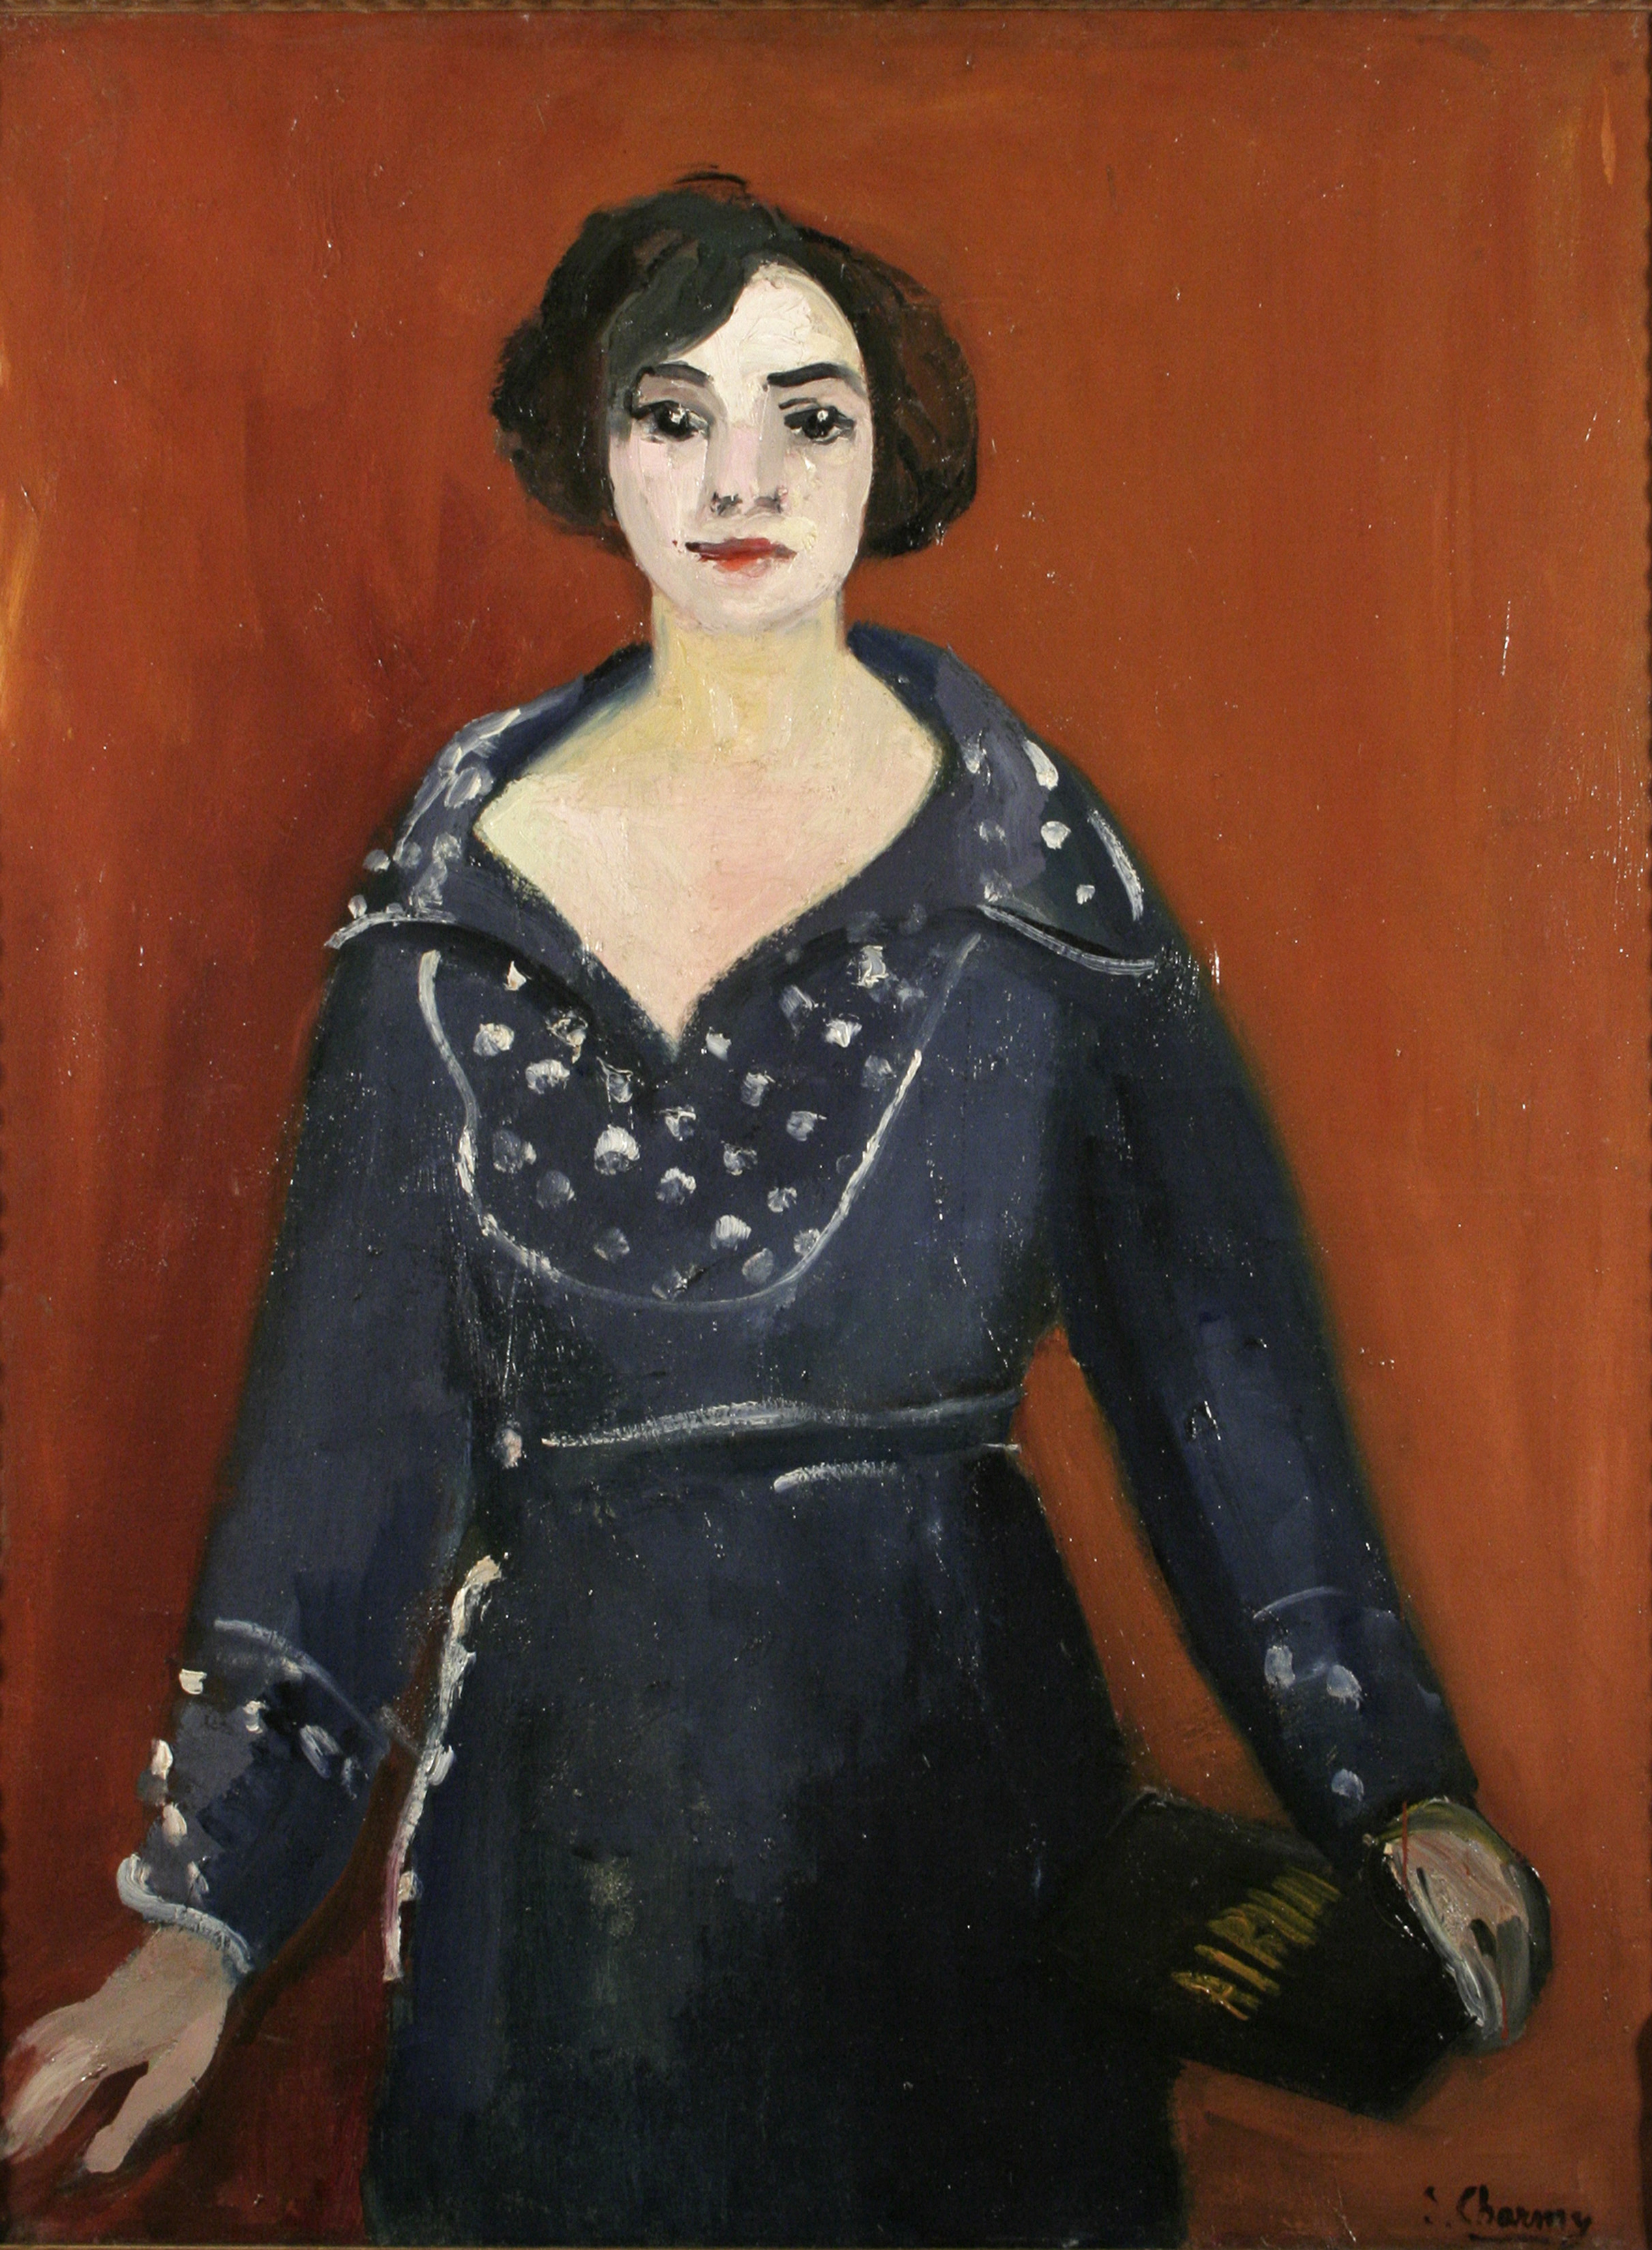 painting of Emilie Charmy in a black dress.